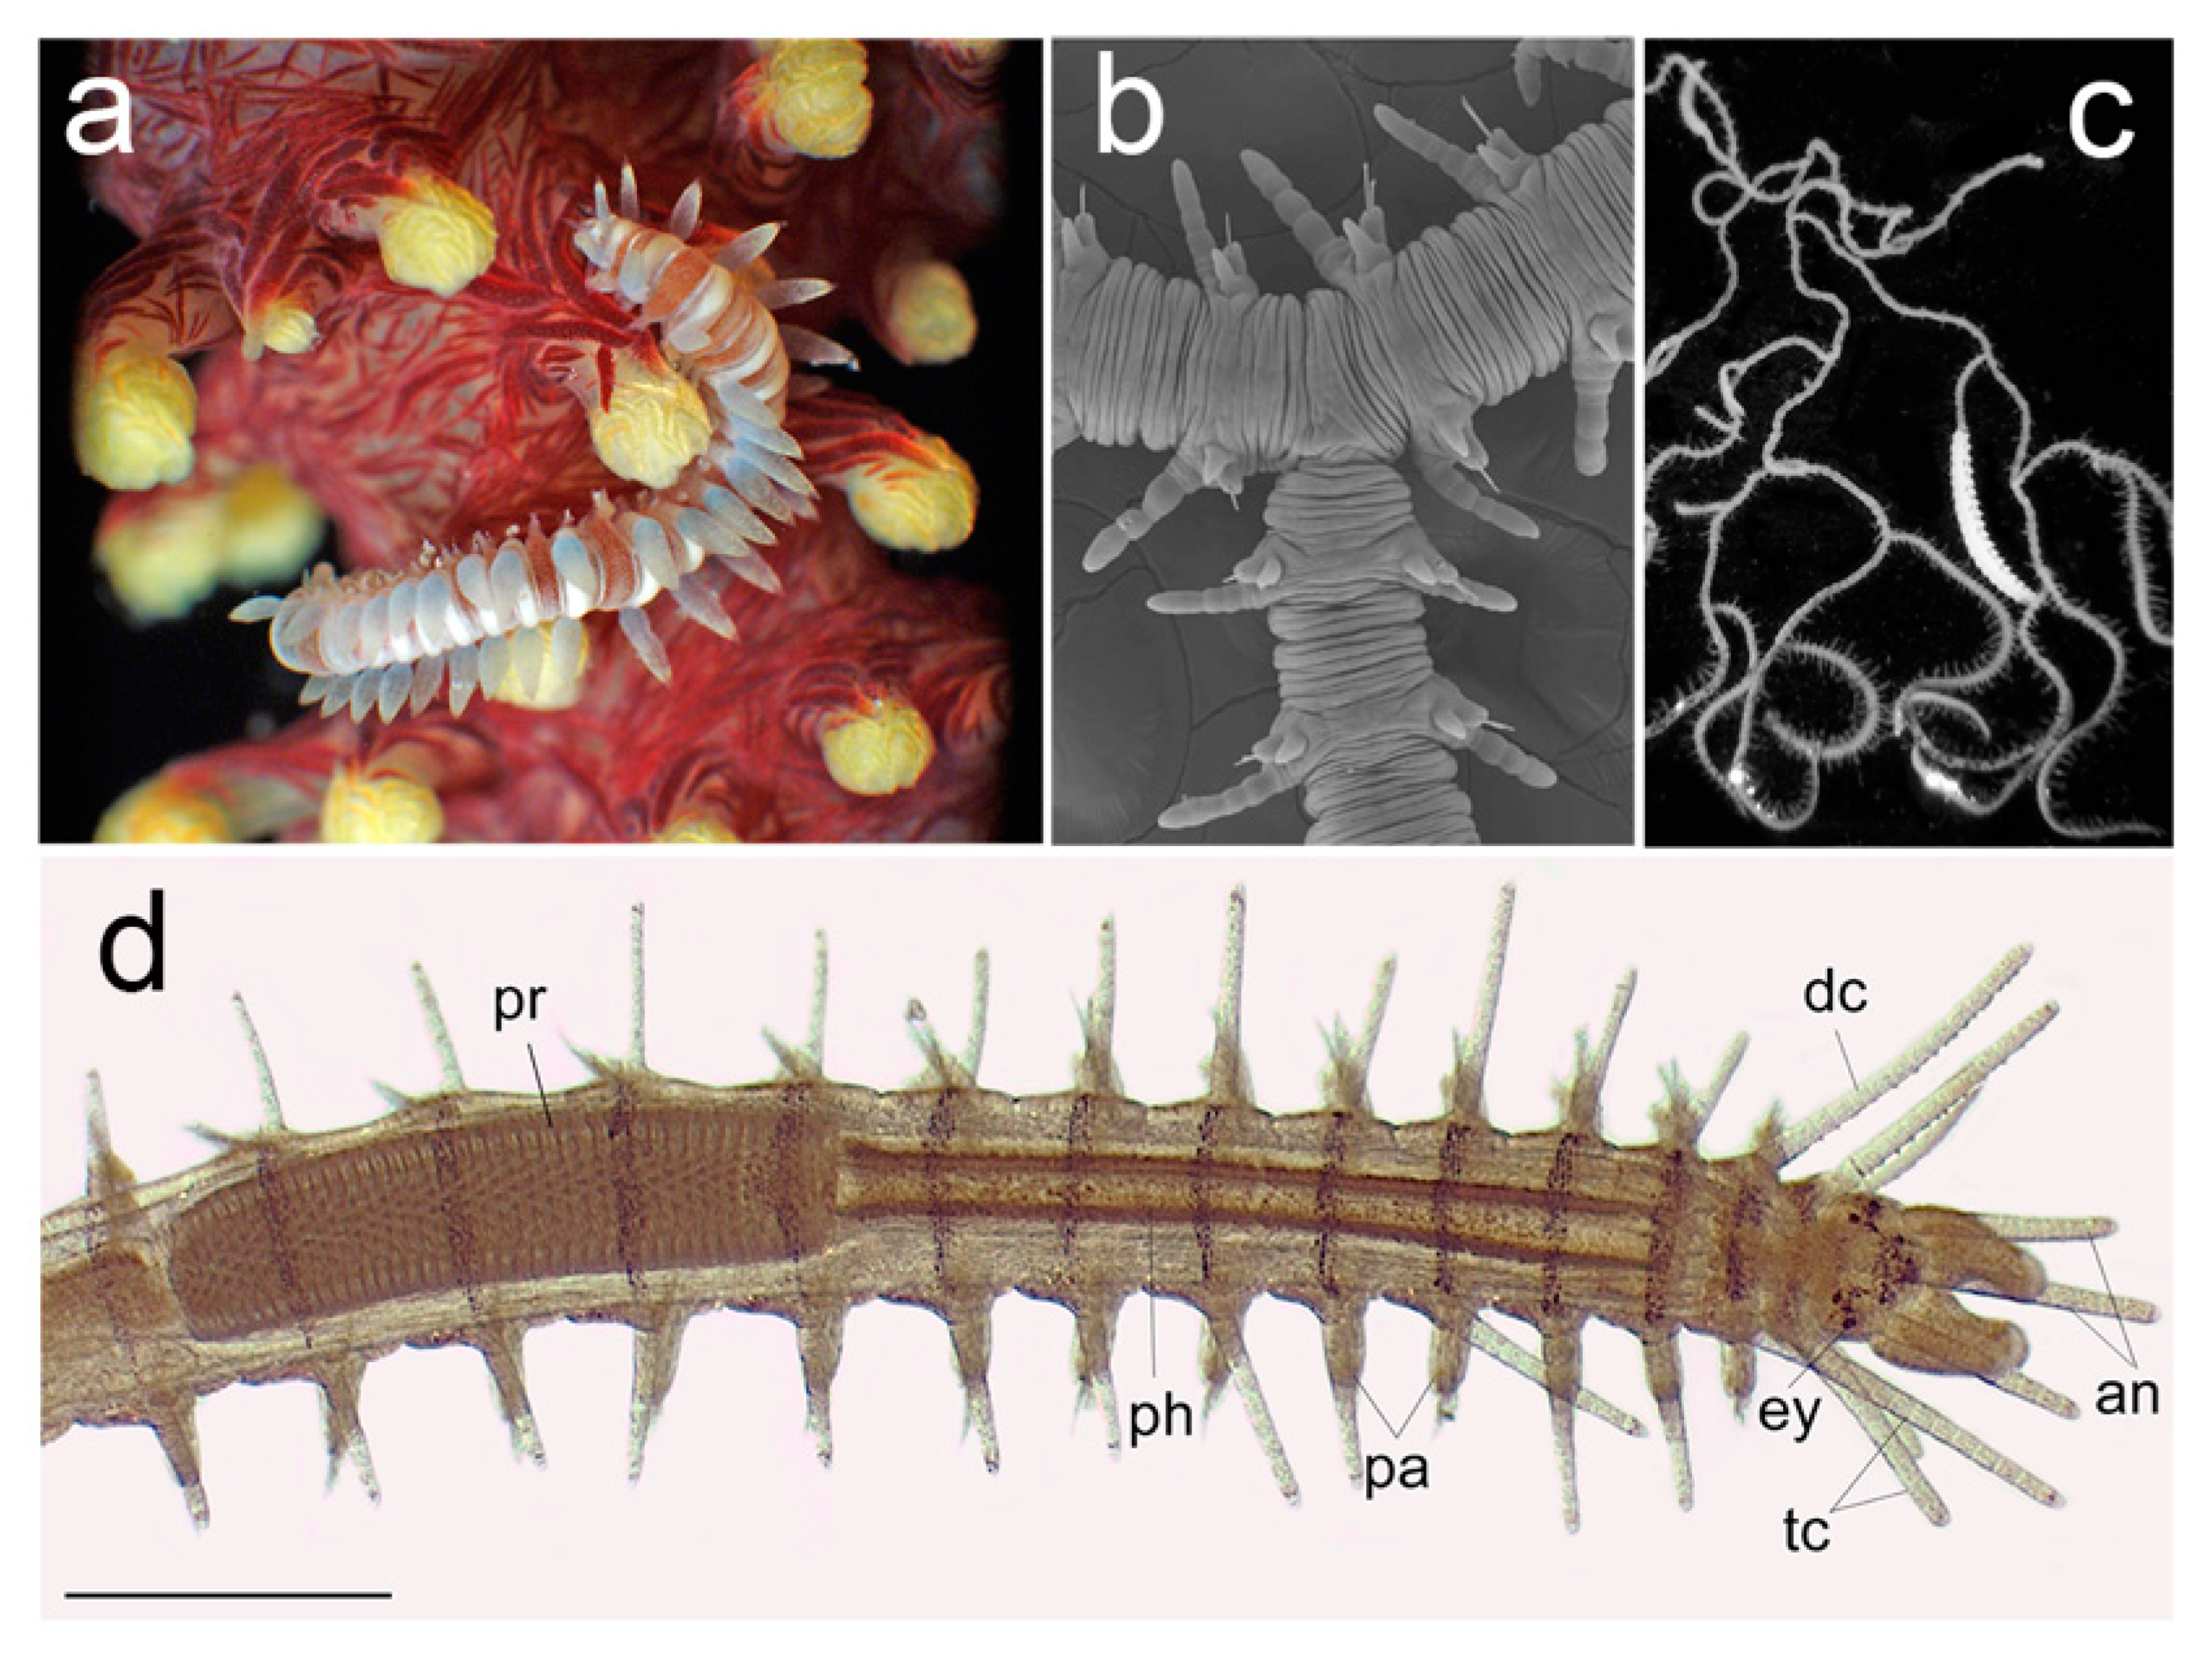 Diversity Free Full Text On The Diversity Of Phyllodocida Annelida Errantia With A Focus On Glyceridae Goniadidae Nephtyidae Polynoidae Sphaerodoridae Syllidae And The Holoplanktonic Families Html